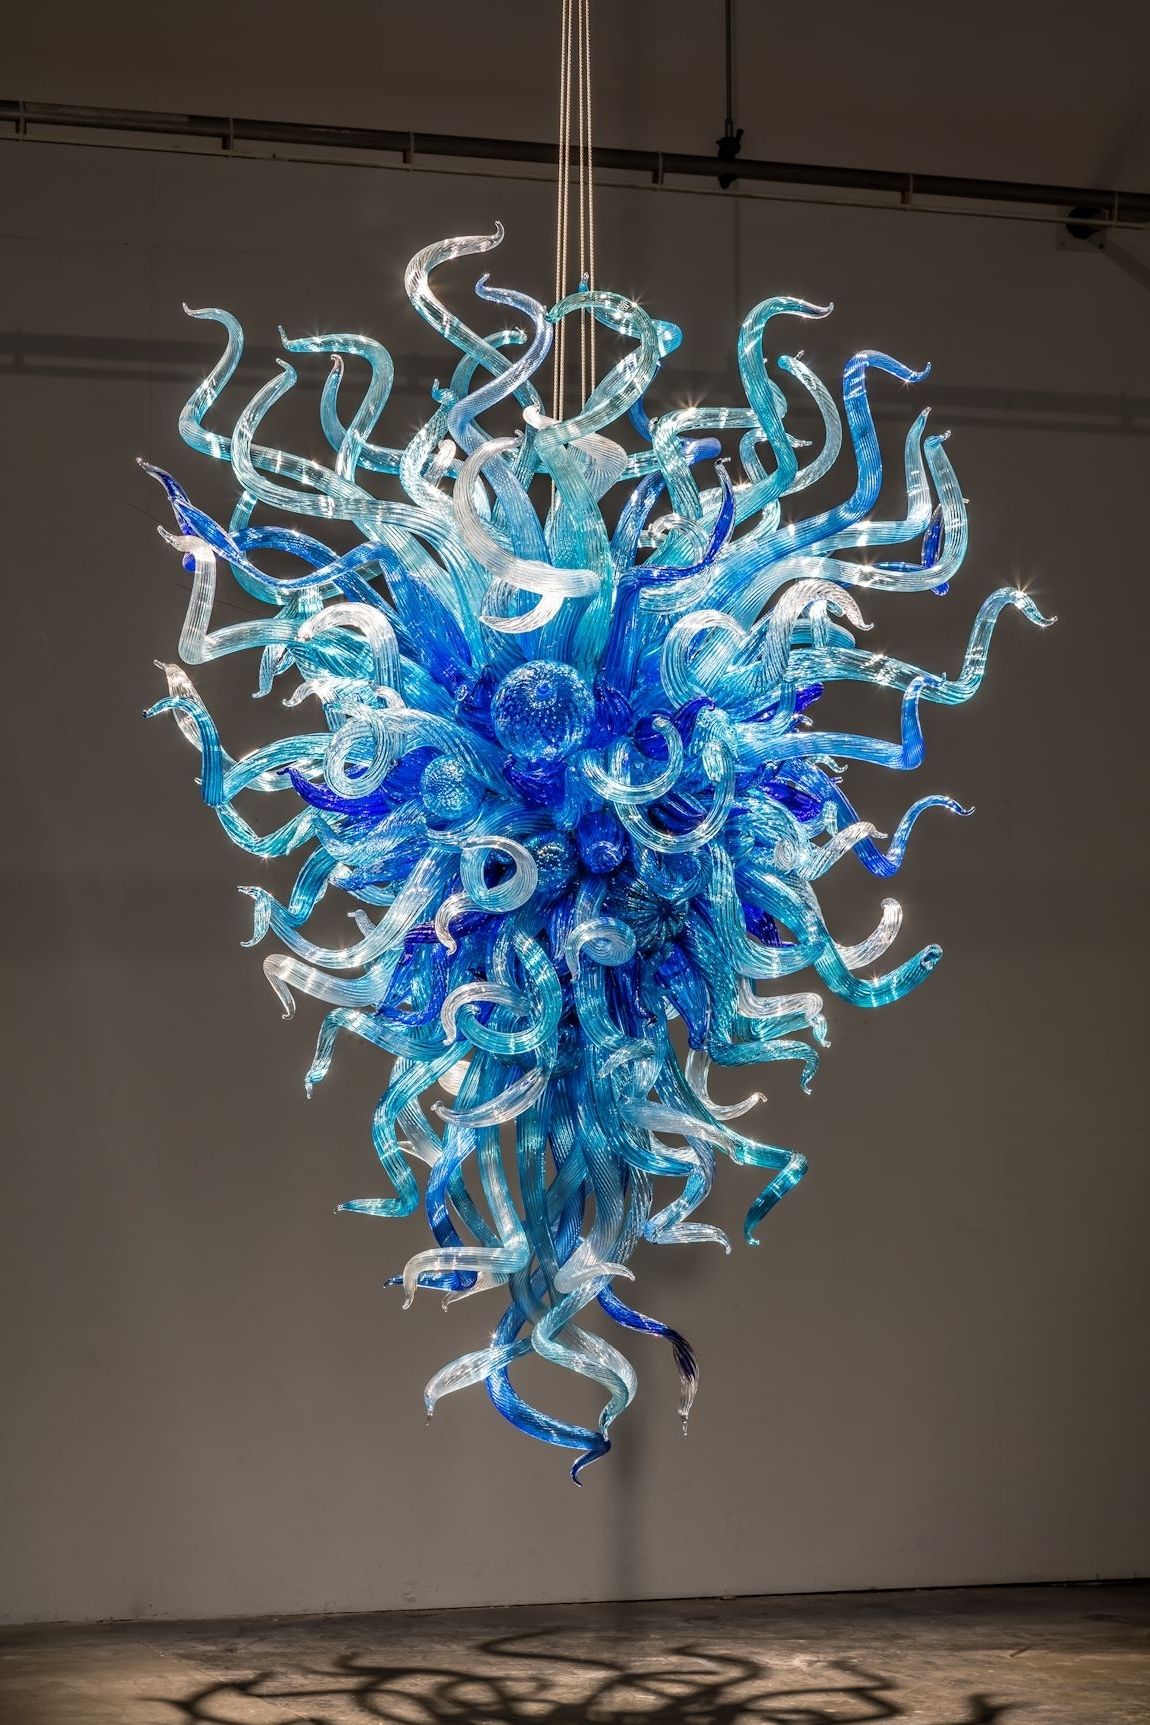 Best And Newest Chandeliers Design : Wonderful Chihuly Chandelier Hanging Blue With Turquoise Blue Chandeliers (View 12 of 15)